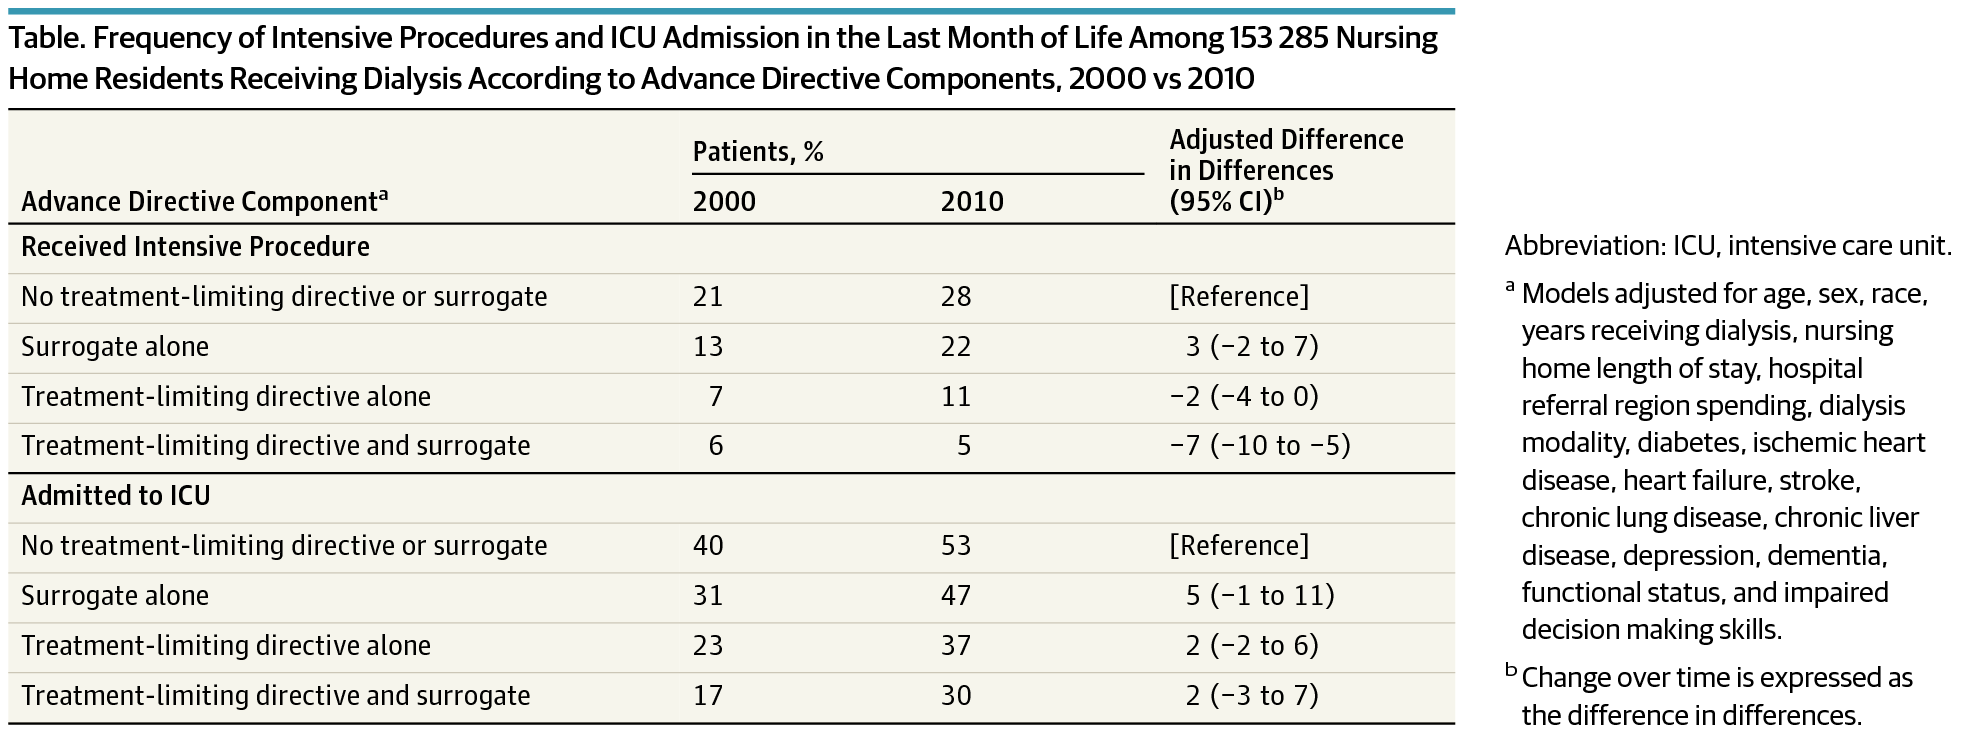 Persistent Gaps in Use of Advance Directives Among Nursing Home Residents Receiving Maintenance Dialysis